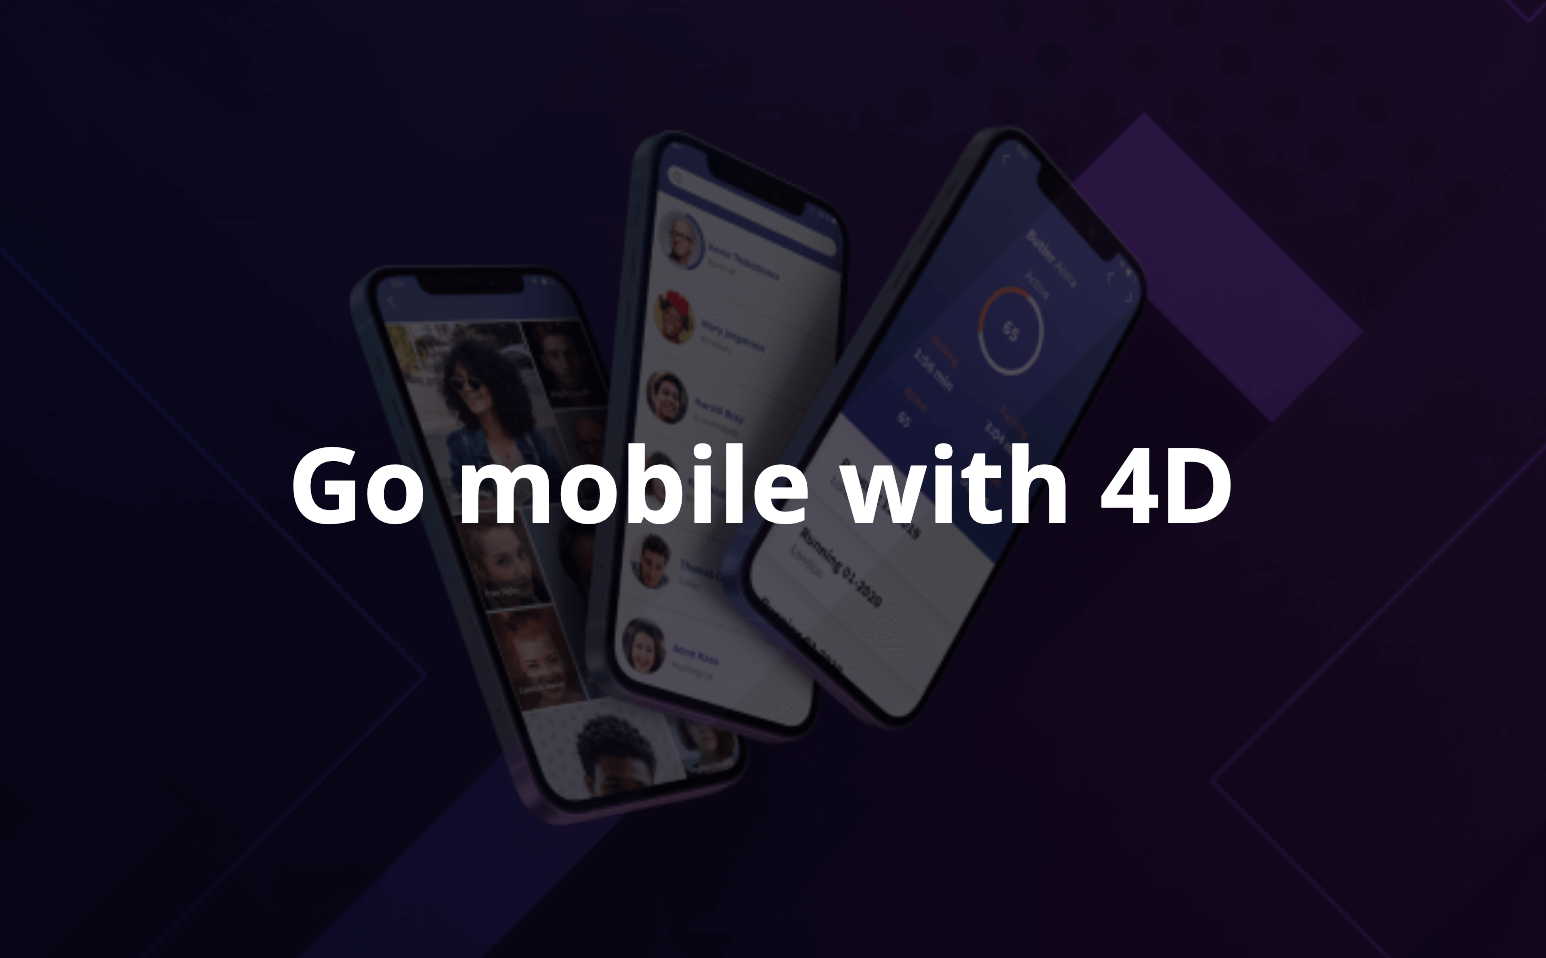 Go mobile with 4D